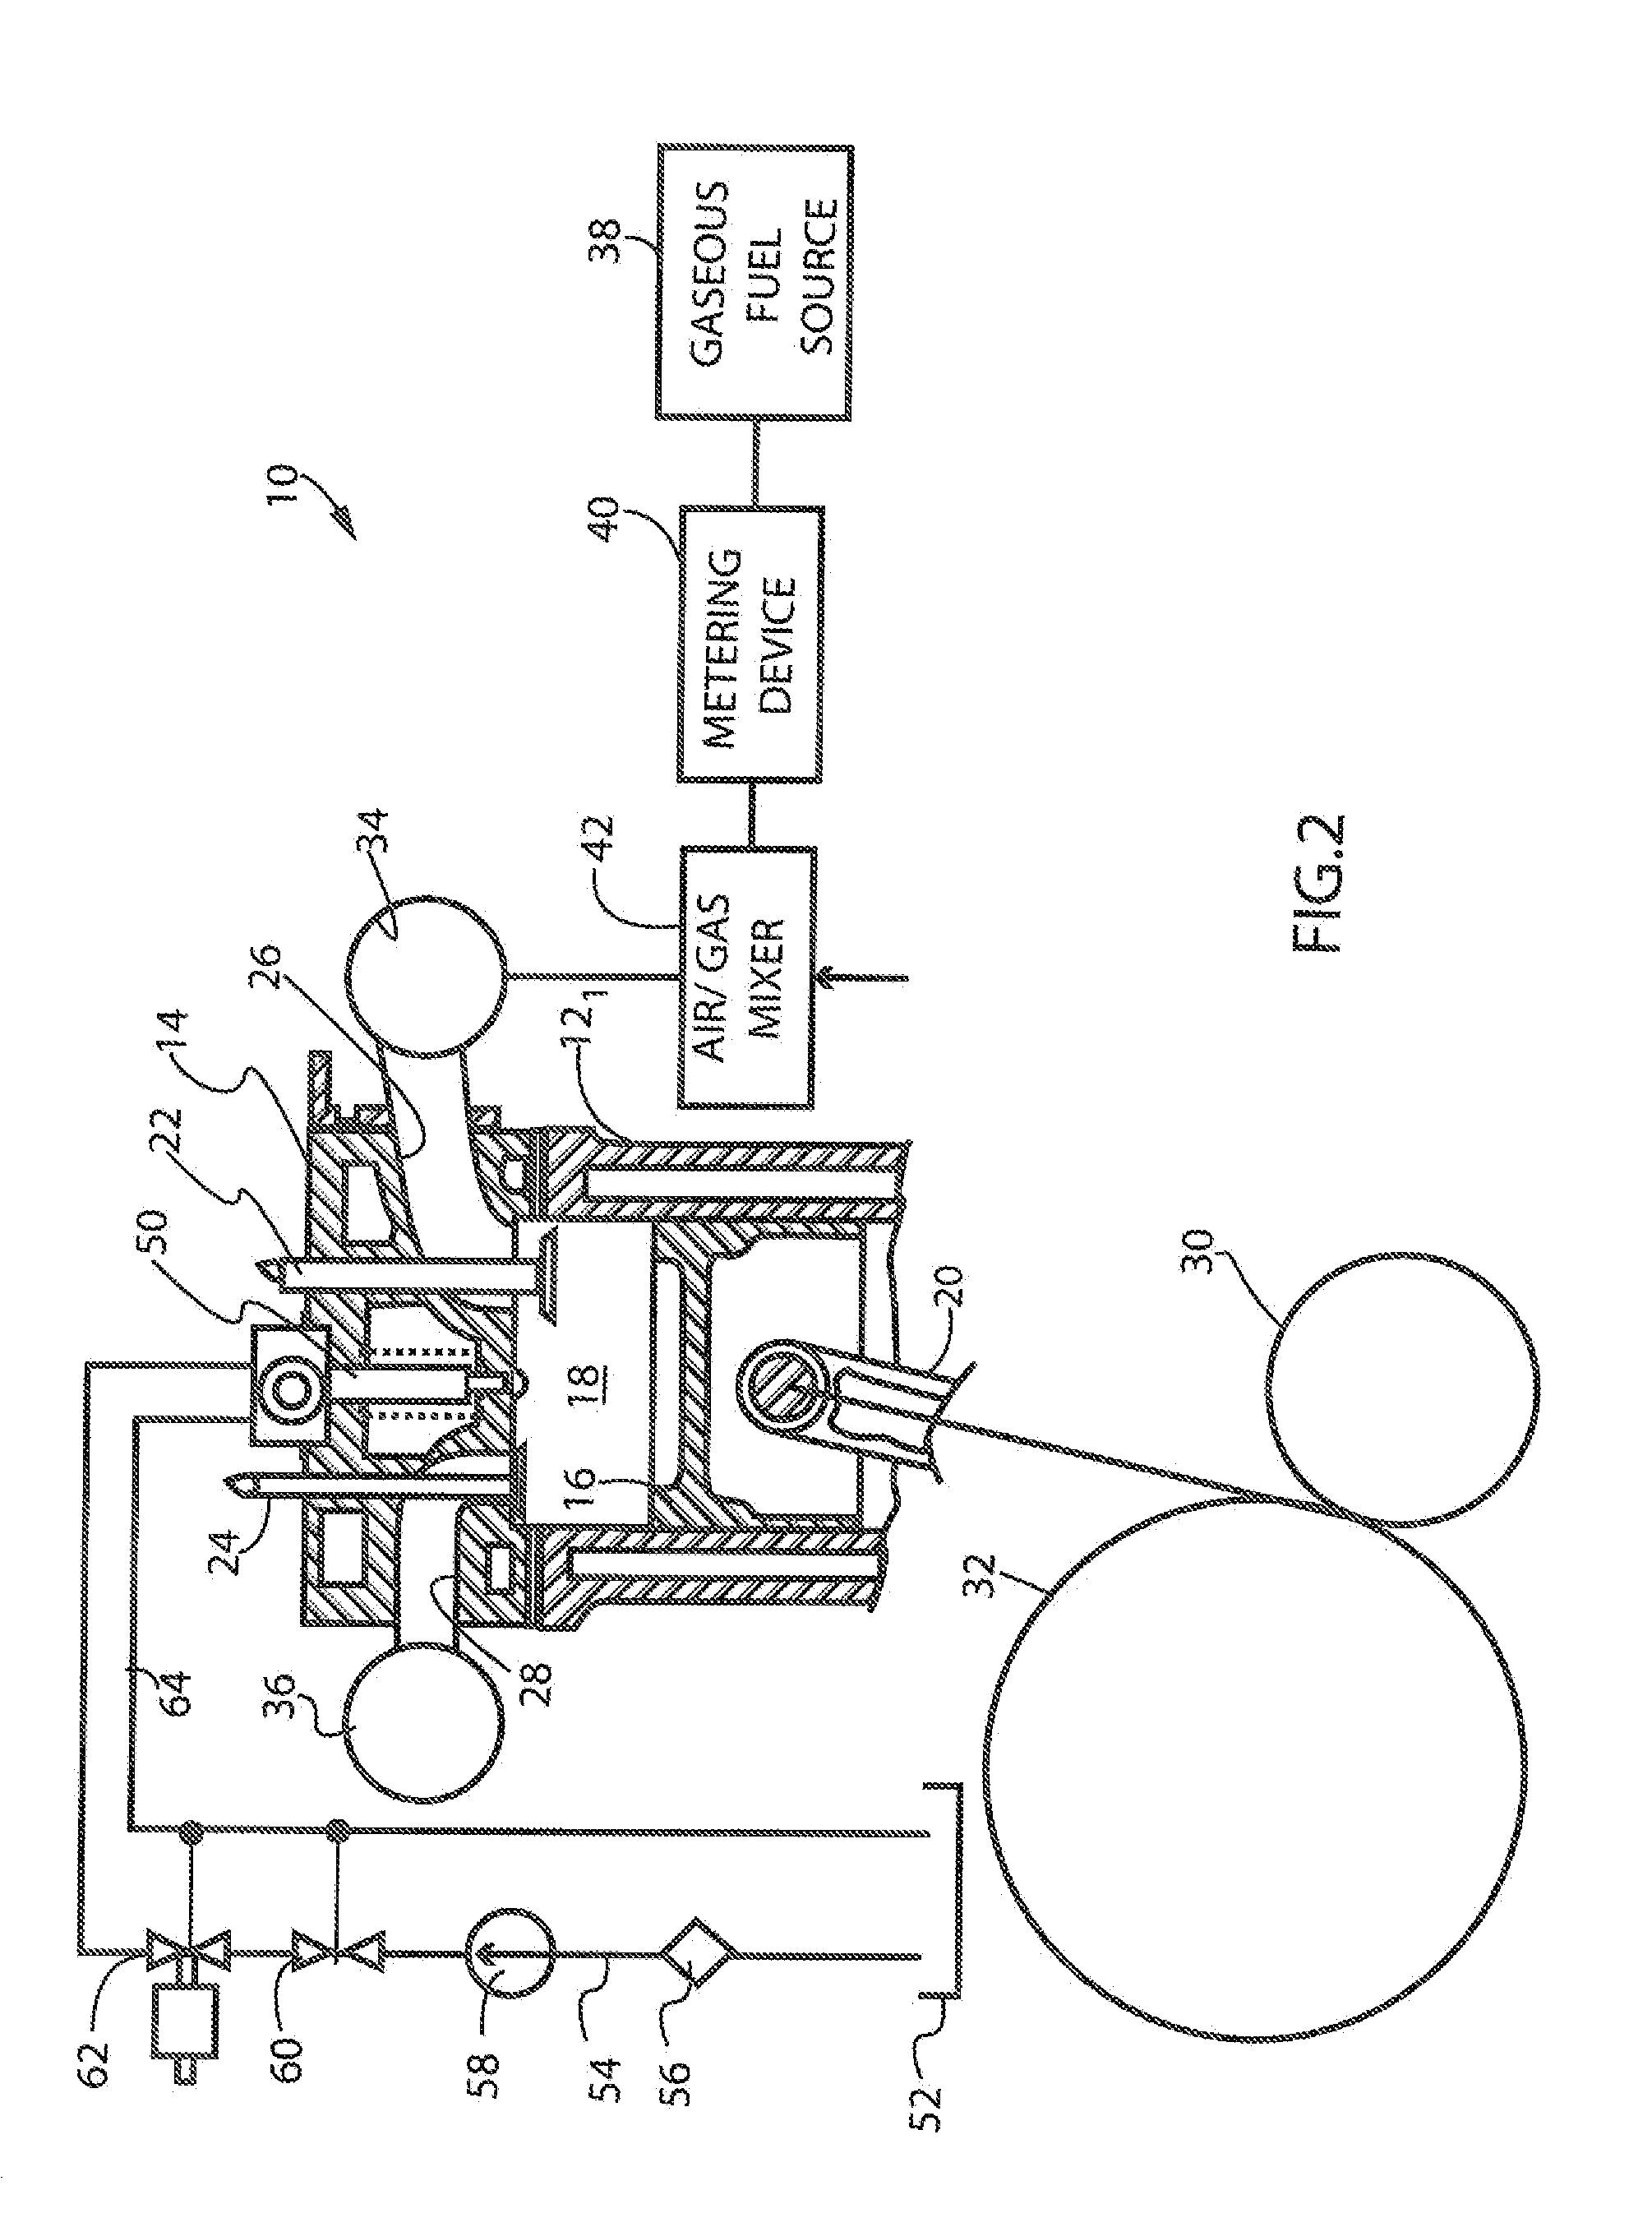 Method and apparatus for controlling premixed combustion in a multimode engine